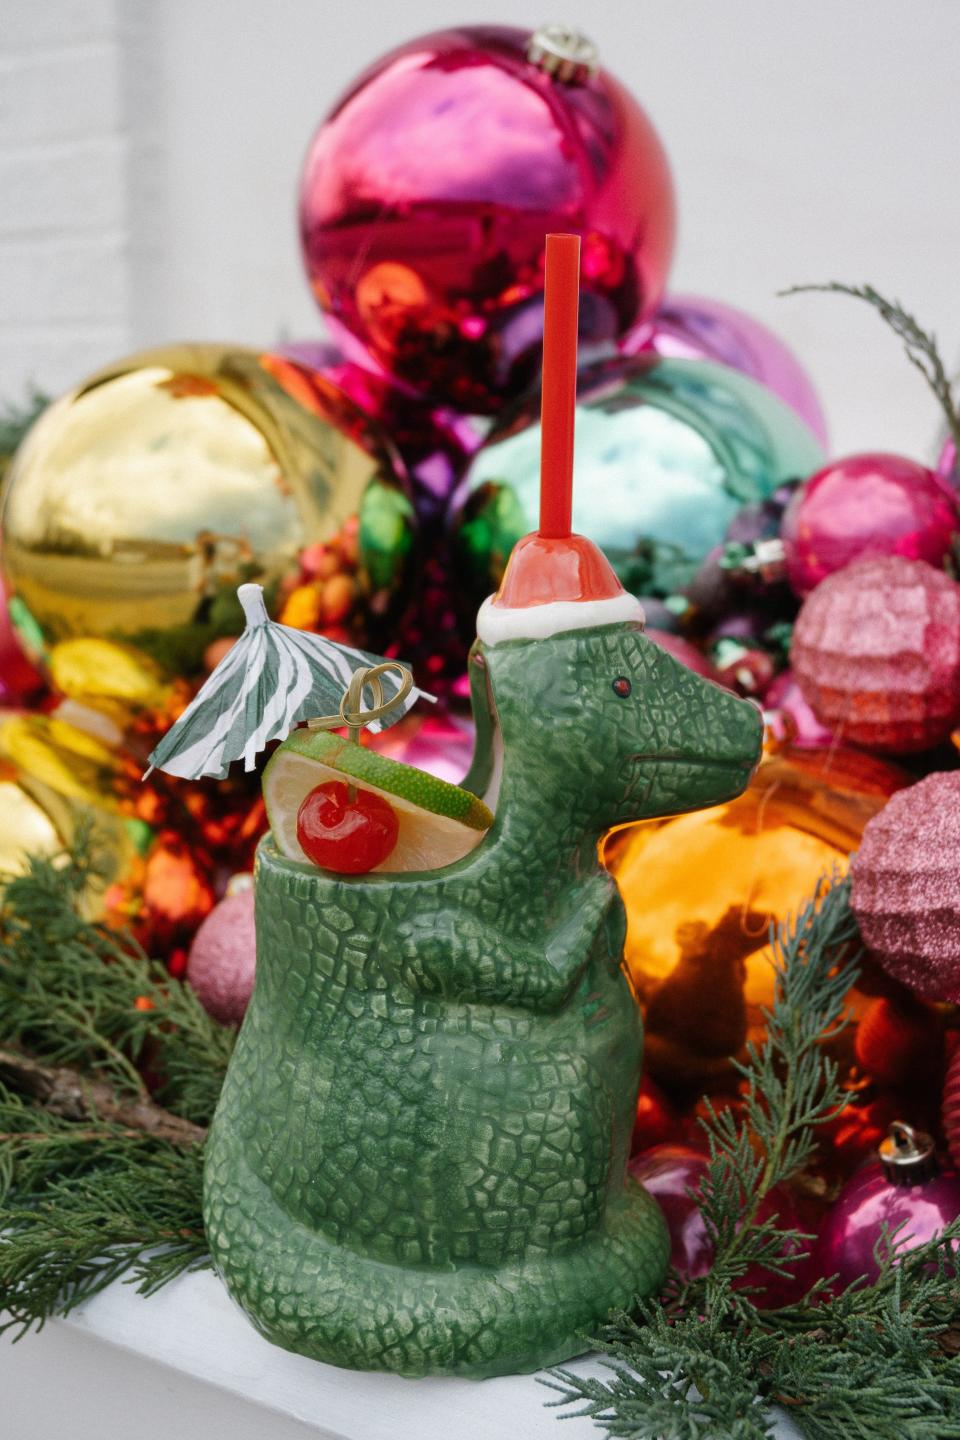 The Miracle holiday cocktail pop-up returns to The Liquor Store for the third year in a row.  The pop-up features holiday-inspired cocktails in kitschy glassware.  Pictured is the Grandma Got Run Over by A T-Rex.